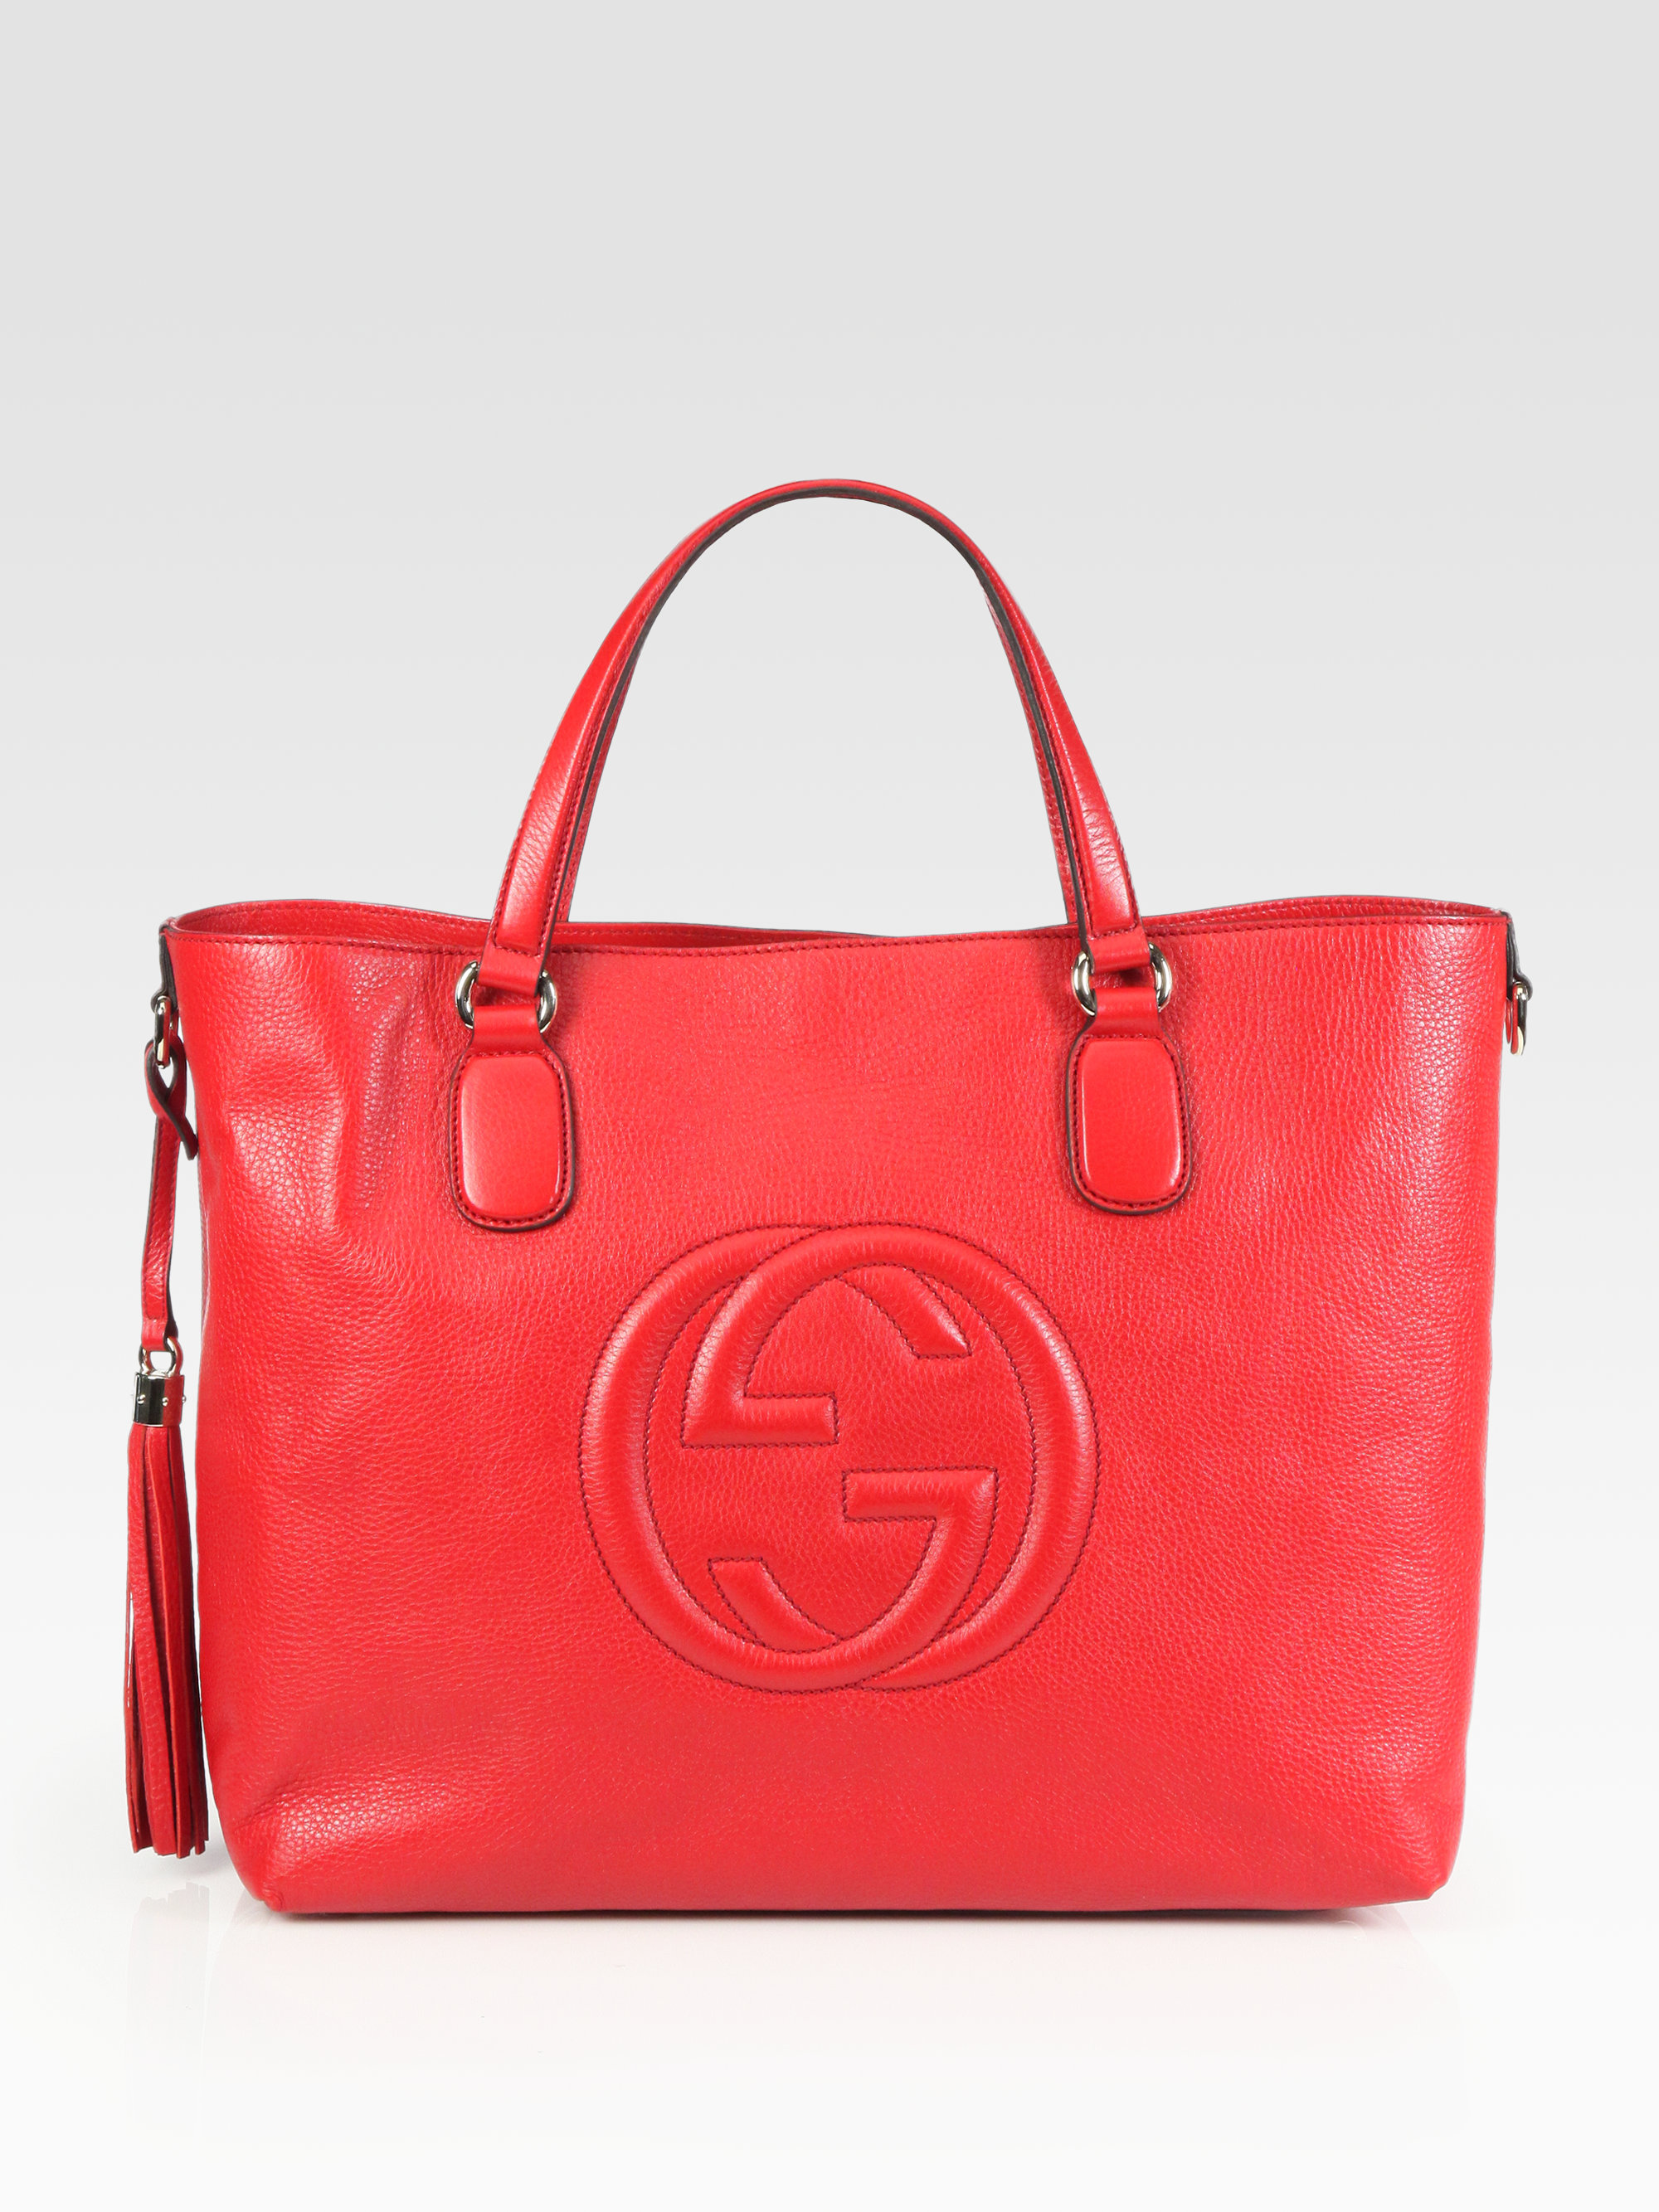 Gucci Soho Medium Tote Bag in Red (bright red) | Lyst